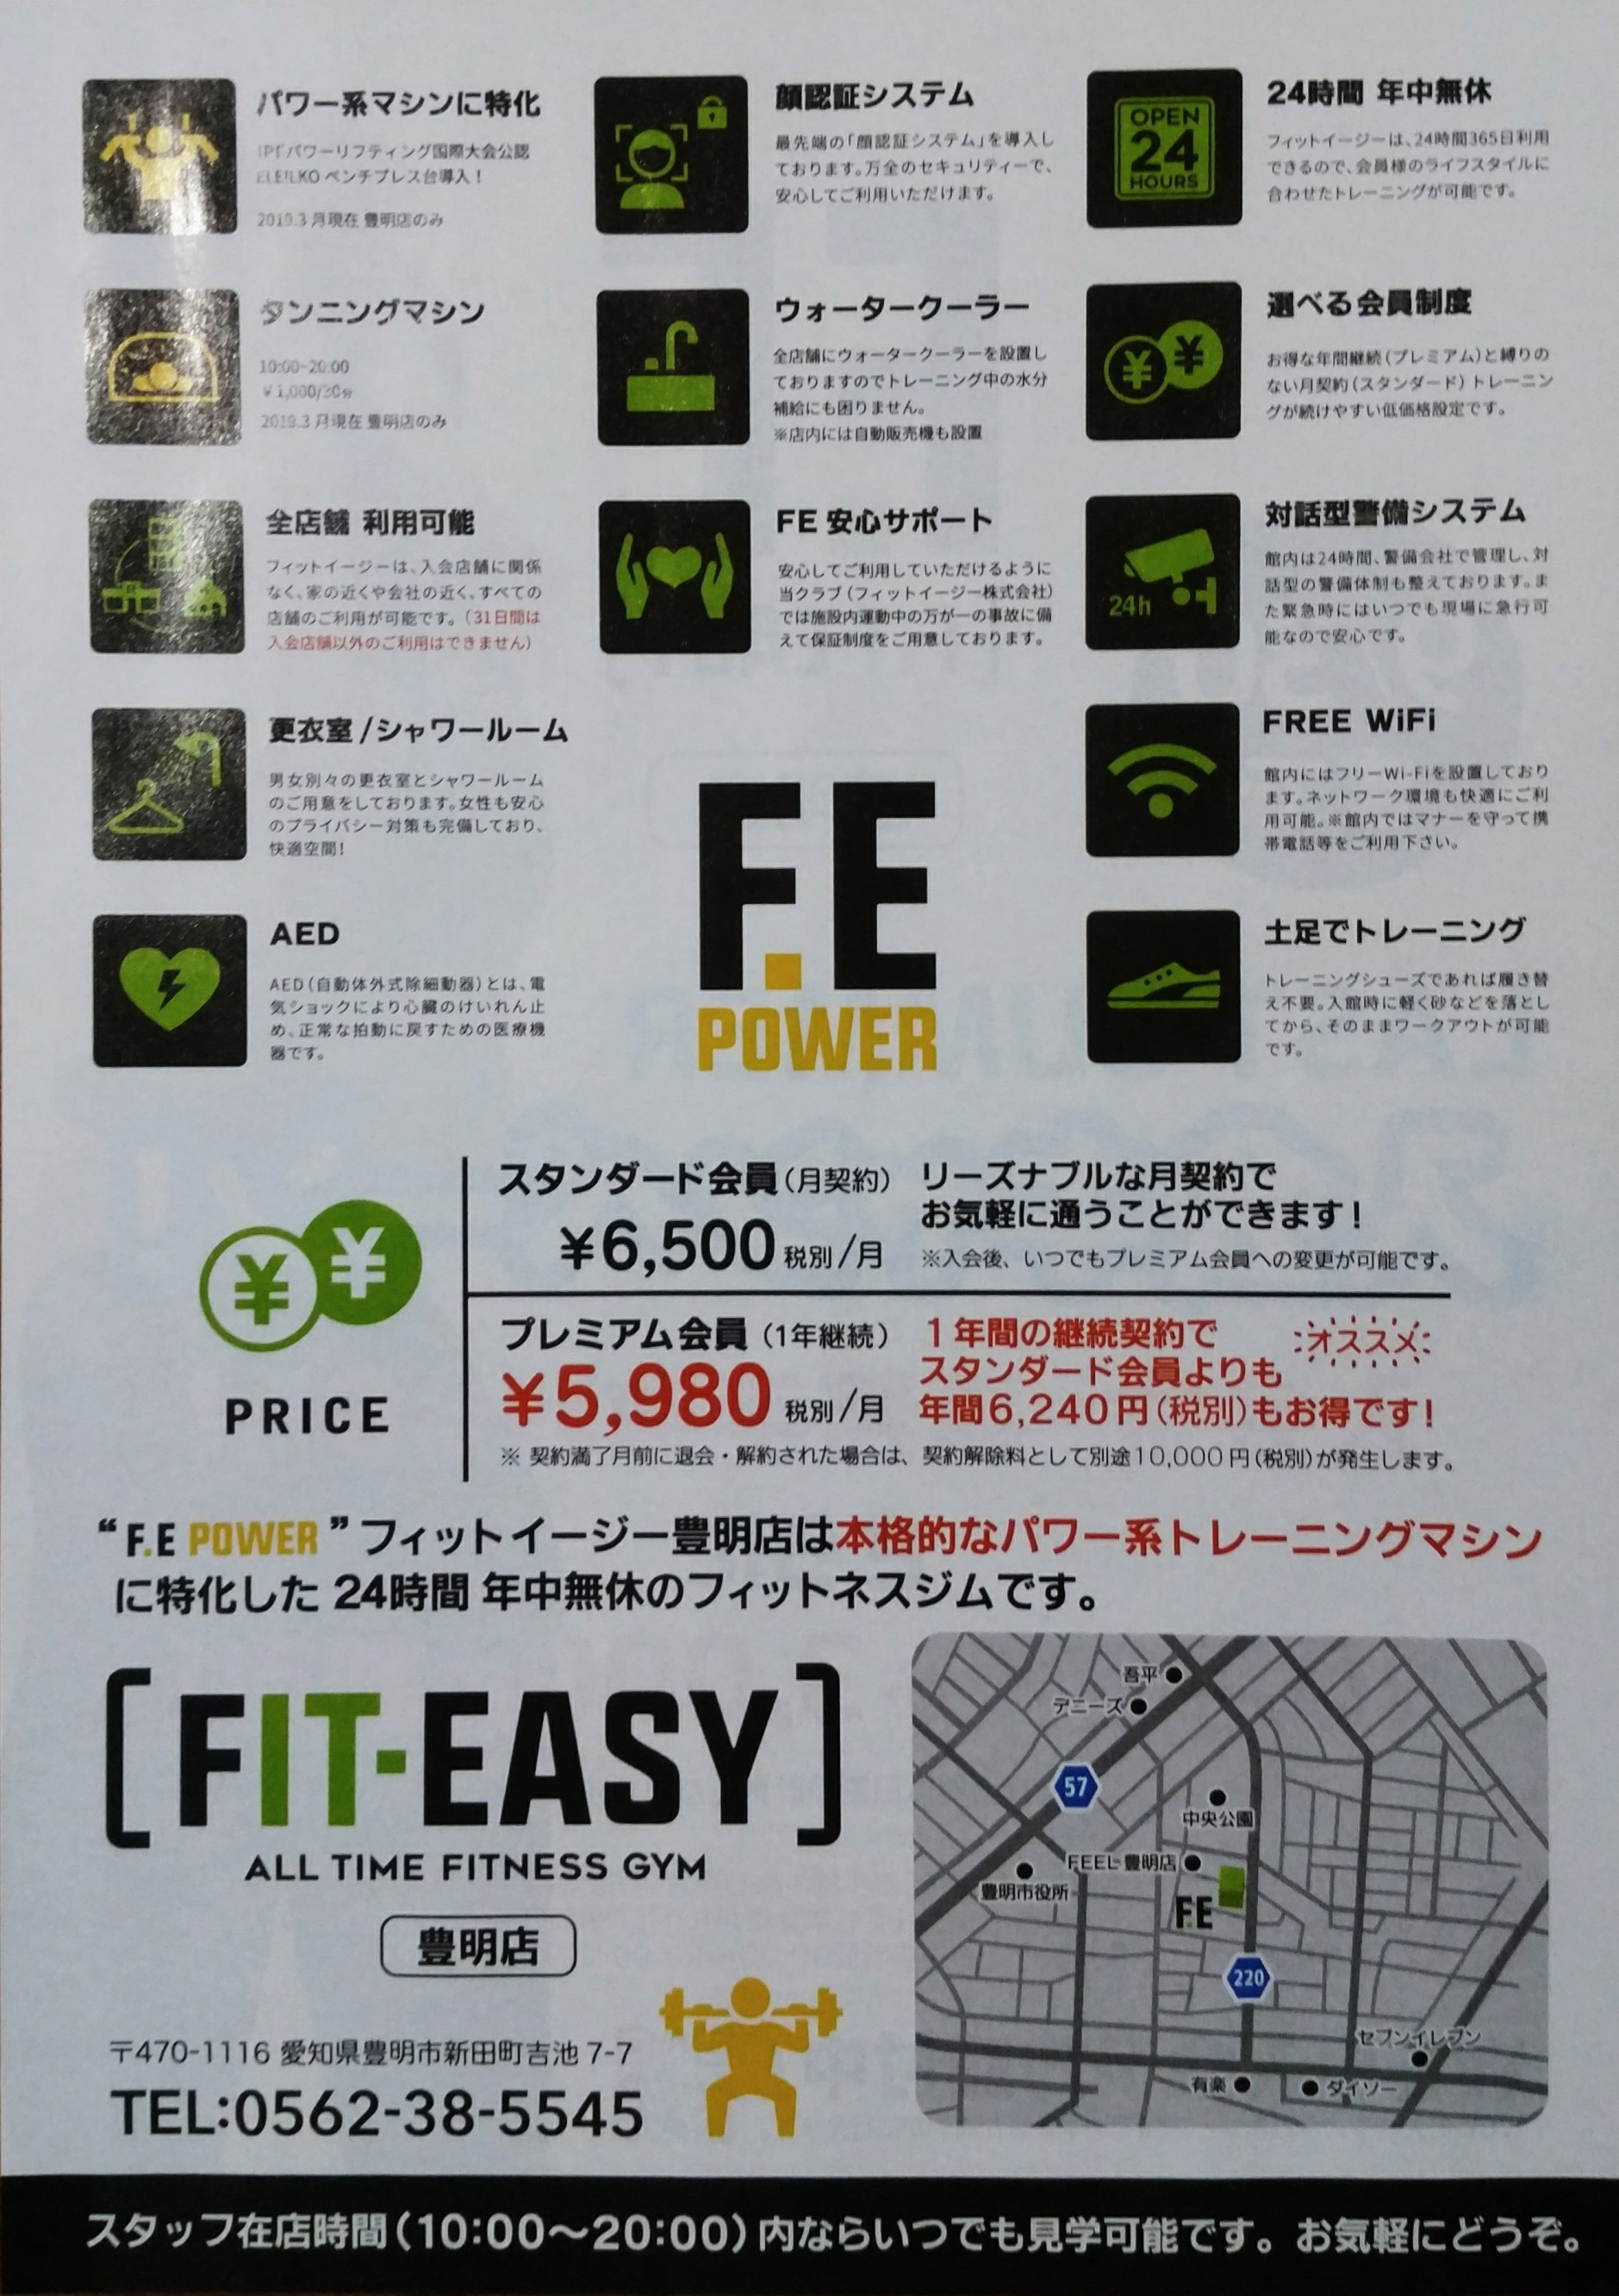 FIT-EASY